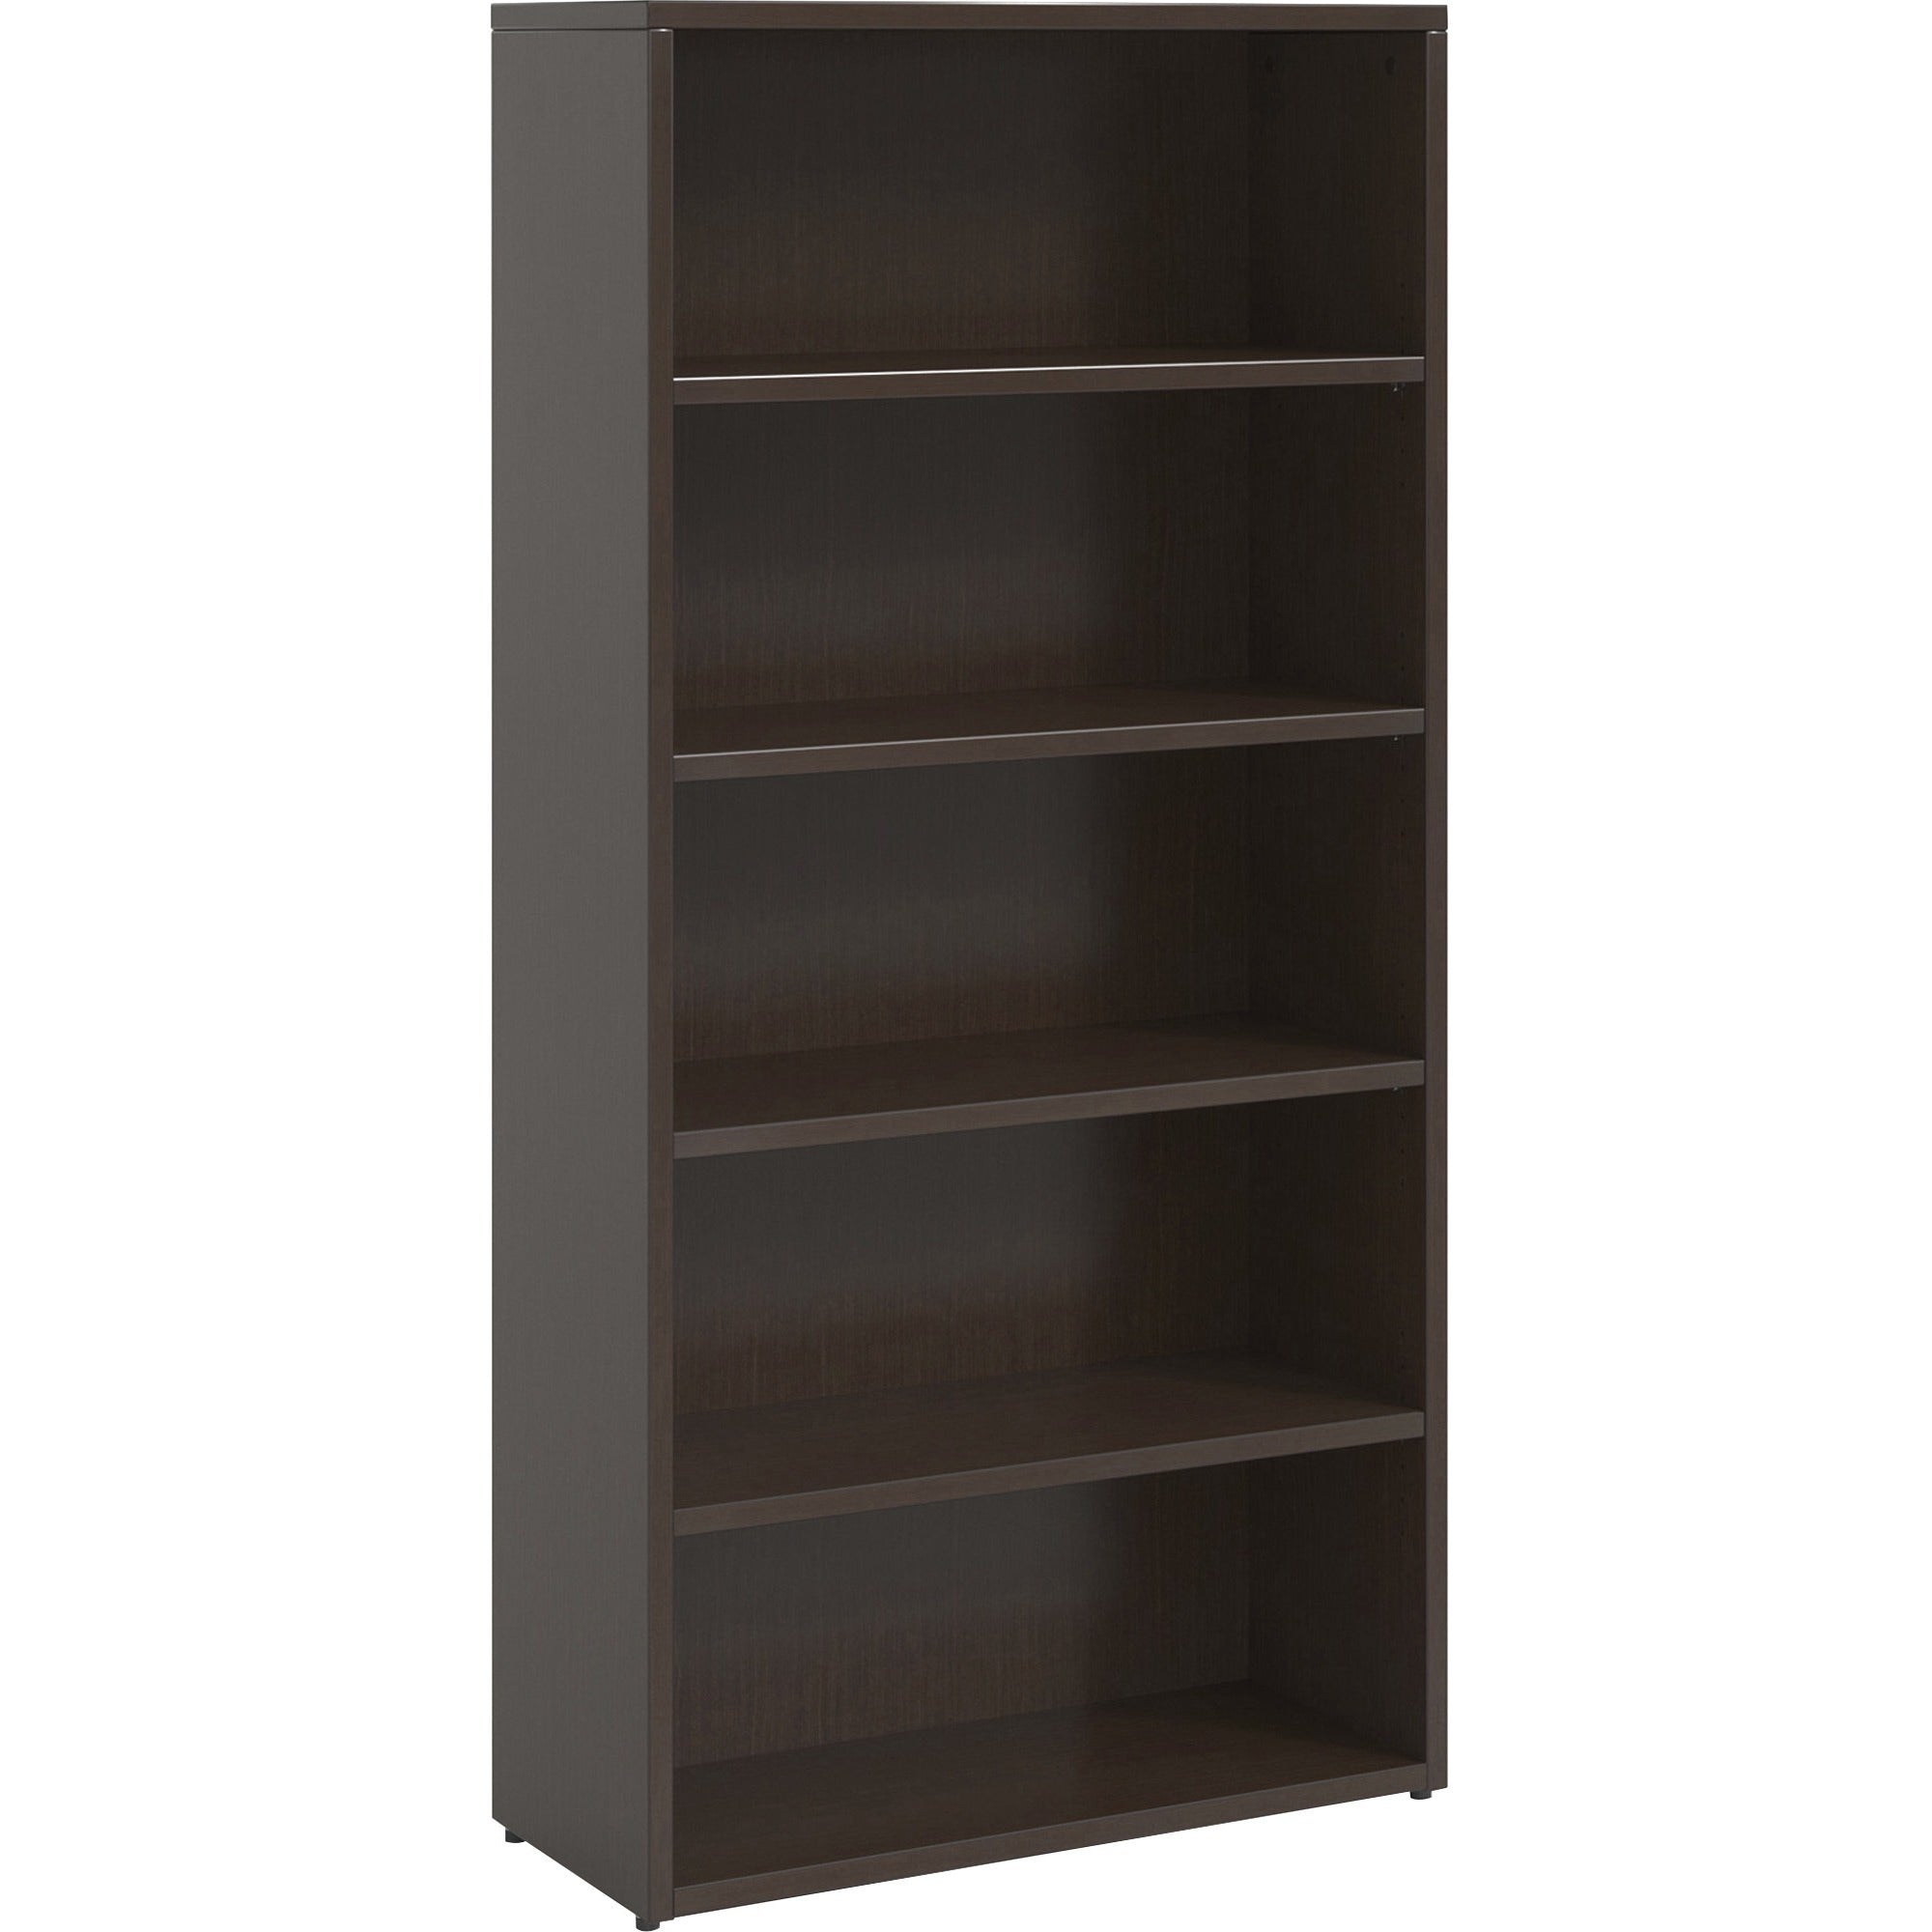 lorell-prominence-20-bookcase-34-x-1269--1-top-0-doors-5-shelves-band-edge-material-particleboard-finish-laminate_llrpbk3469es - 1